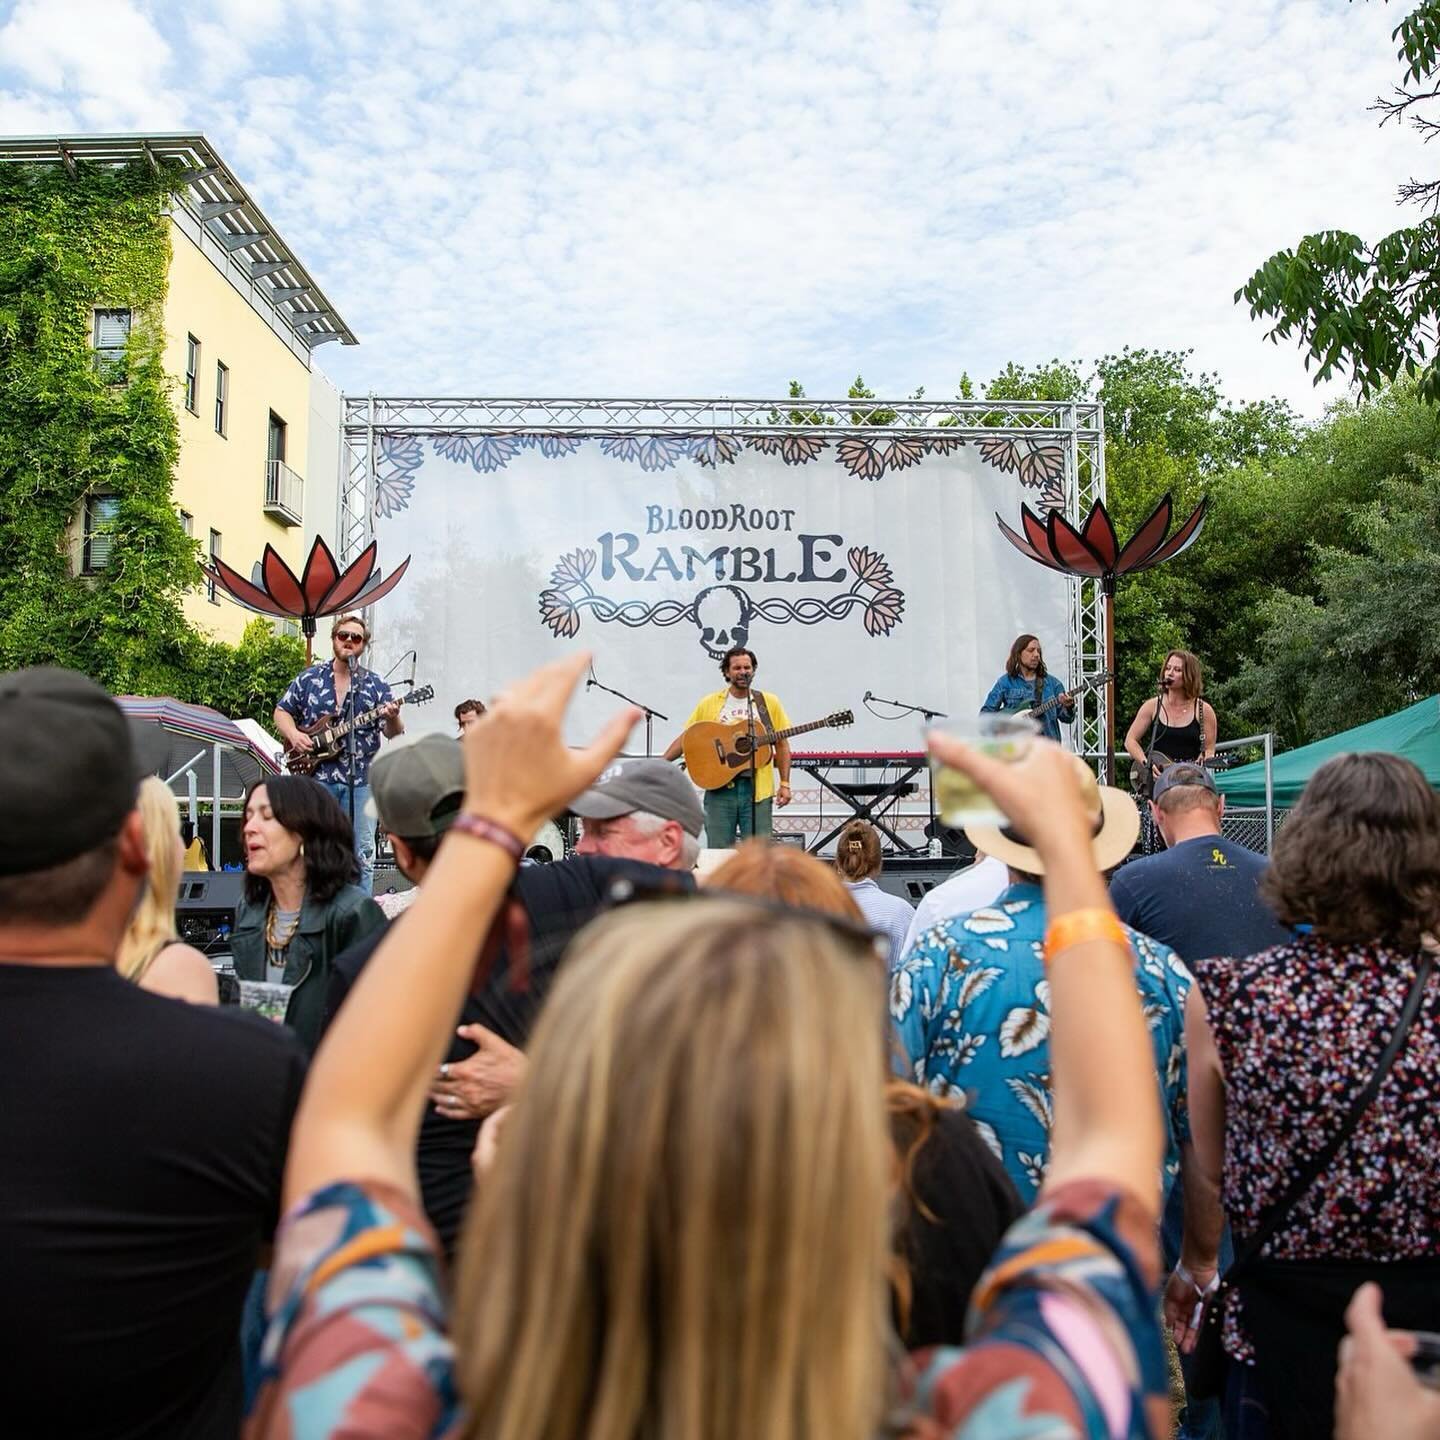 Picture this: the sun is shining, the @bloodrootwines are flowing, and you are front and center as @lordhuron takes the stage. We&rsquo;ll be there, and so should you! 

Grab your tickets to The Ramble, Healdsburg&rsquo;s very own two-day music and w